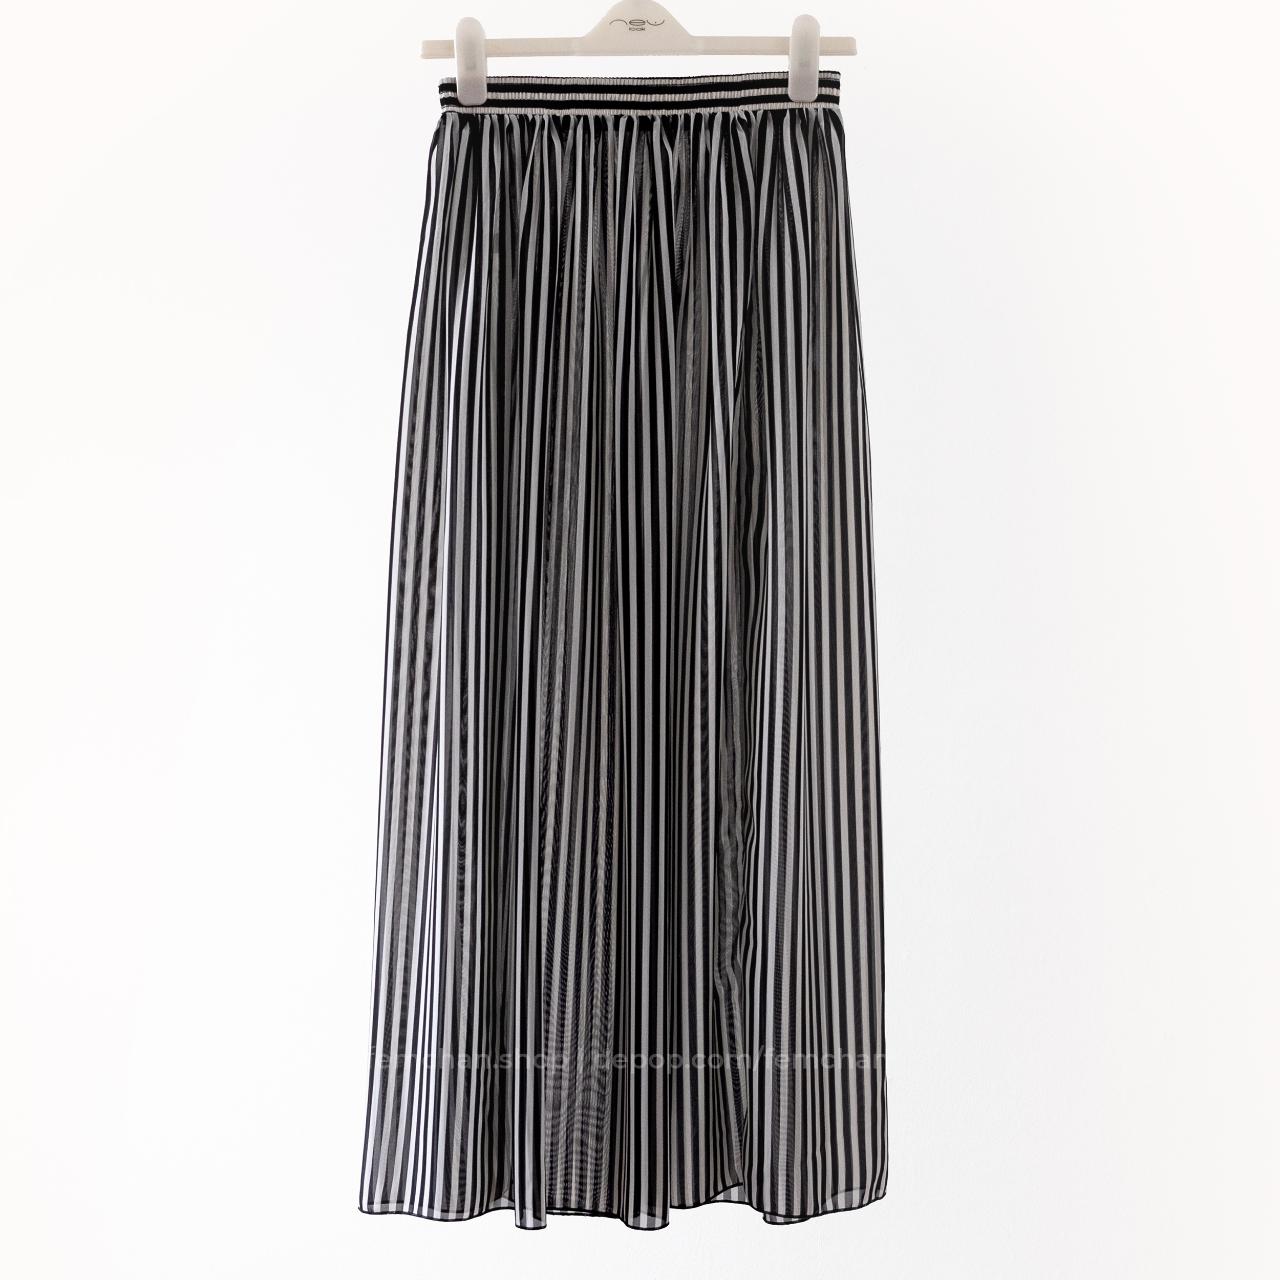 Sheer chiffon maxi skirt with black and white... - Depop